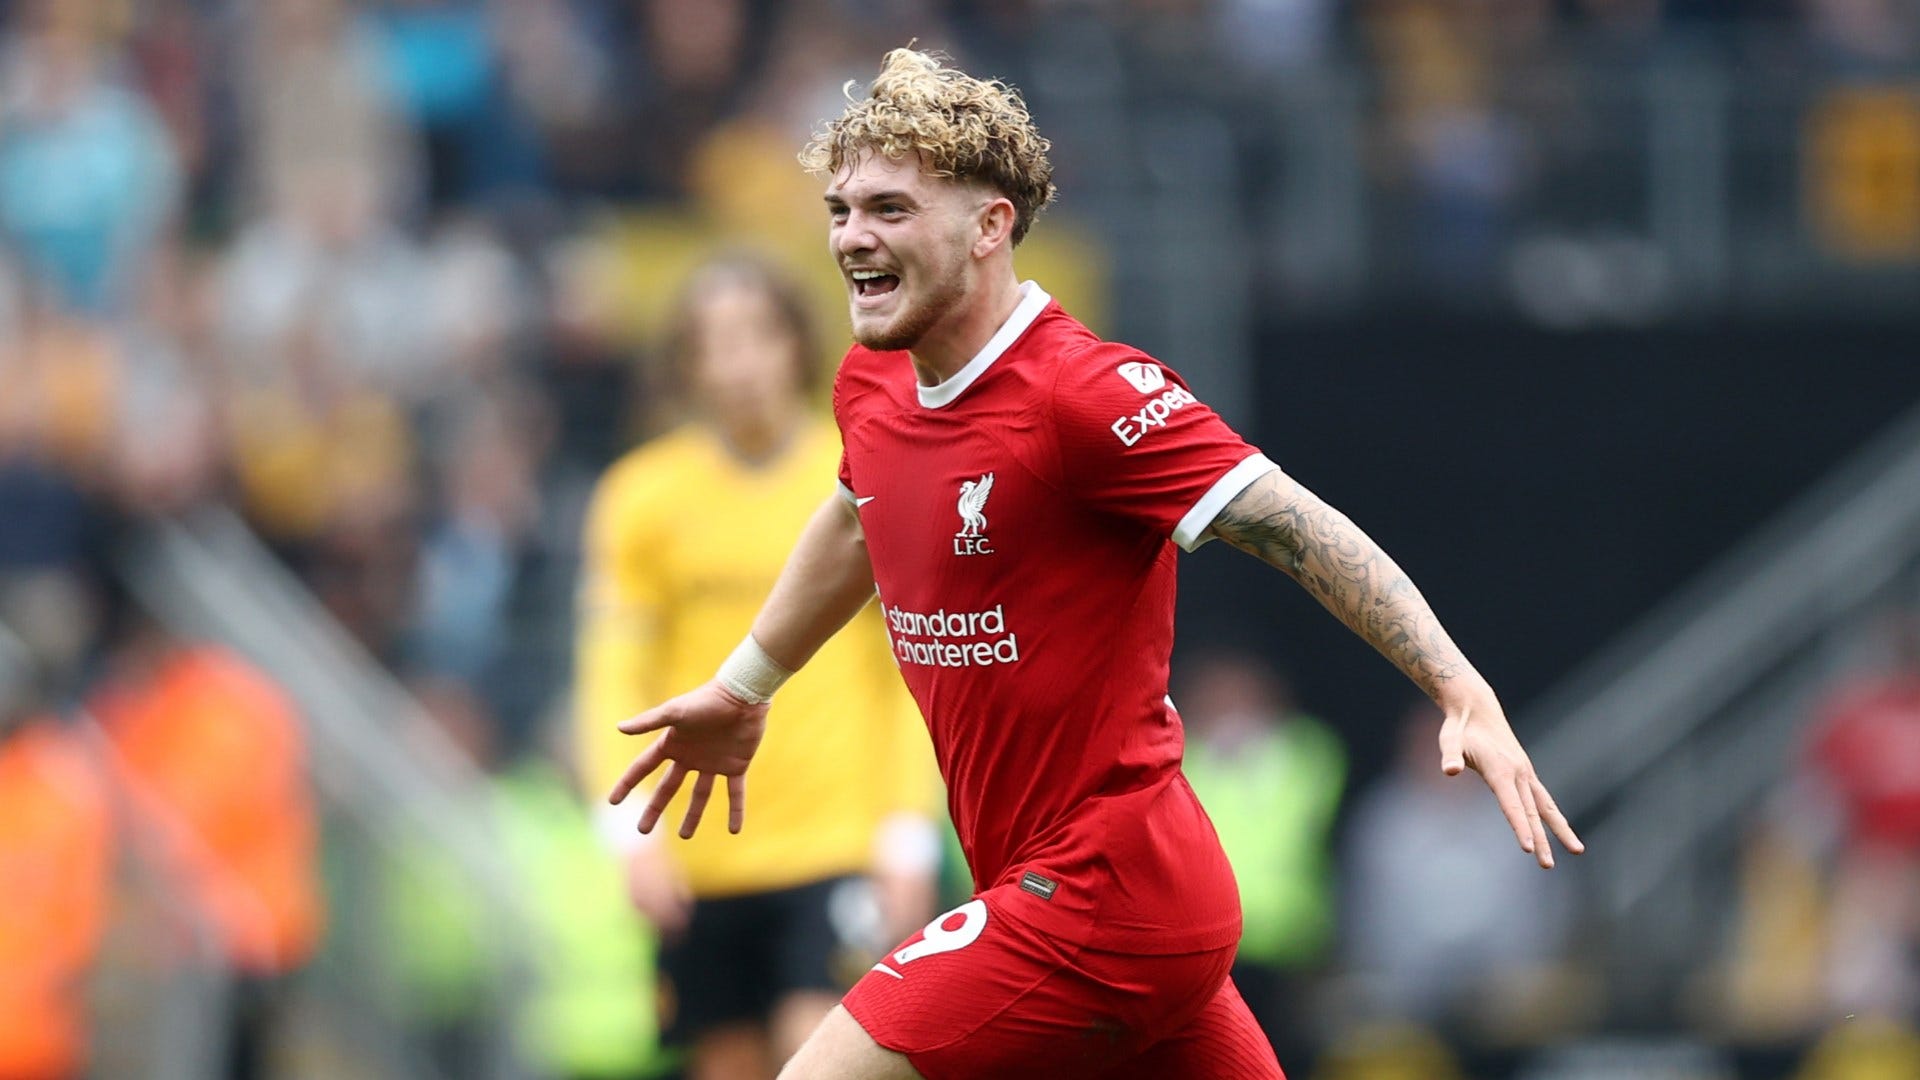 LASK vs Liverpool Live stream, TV channel, kick-off time and where to watch Goal UK